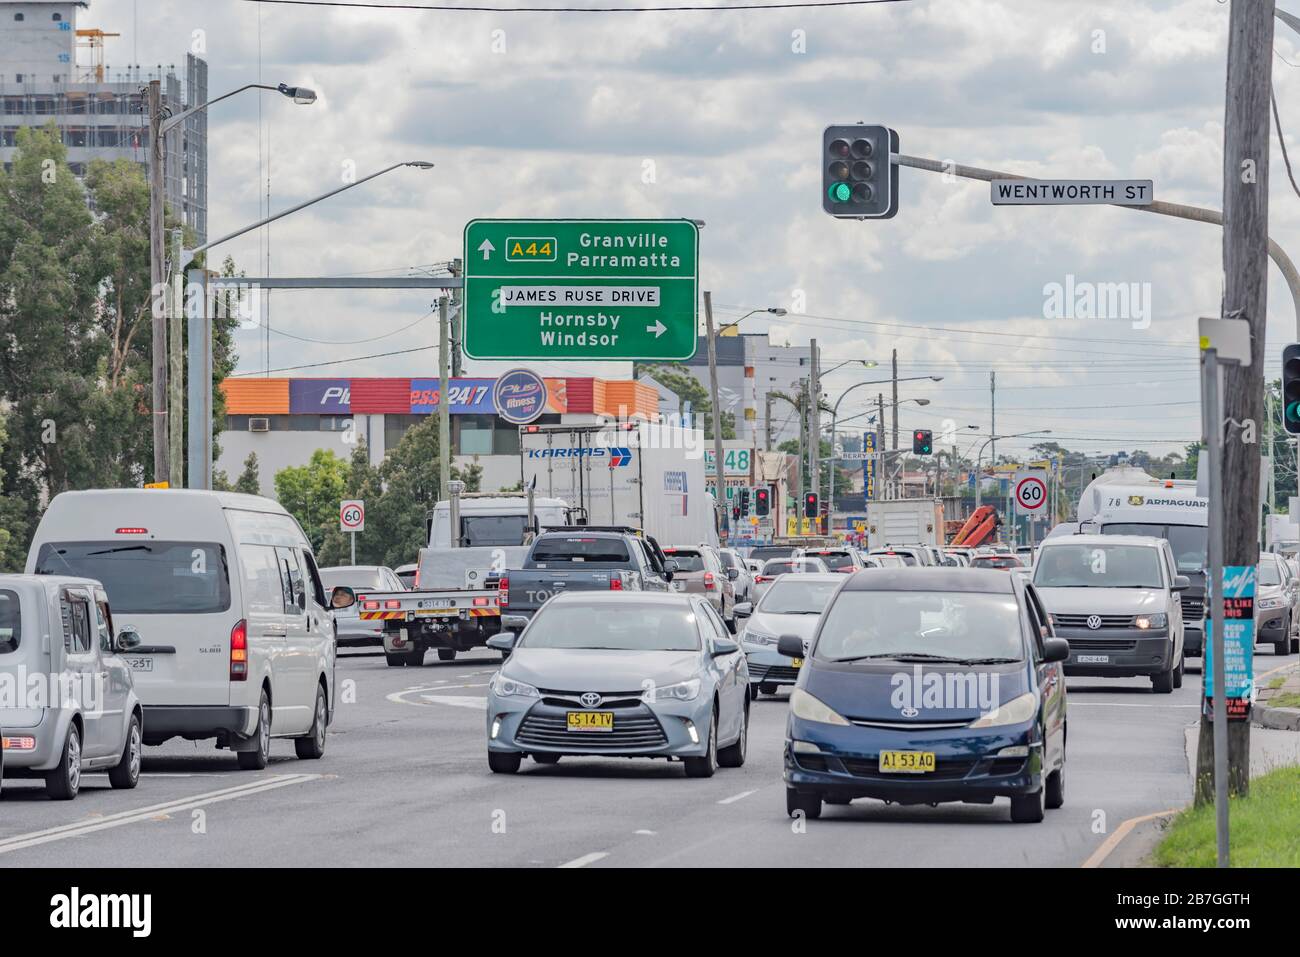 Vehicle congestion on Parramatta Road near the intersection with James Ruse Drive in the Sydney suburb of Clyde, New South Wales, Australia Stock Photo